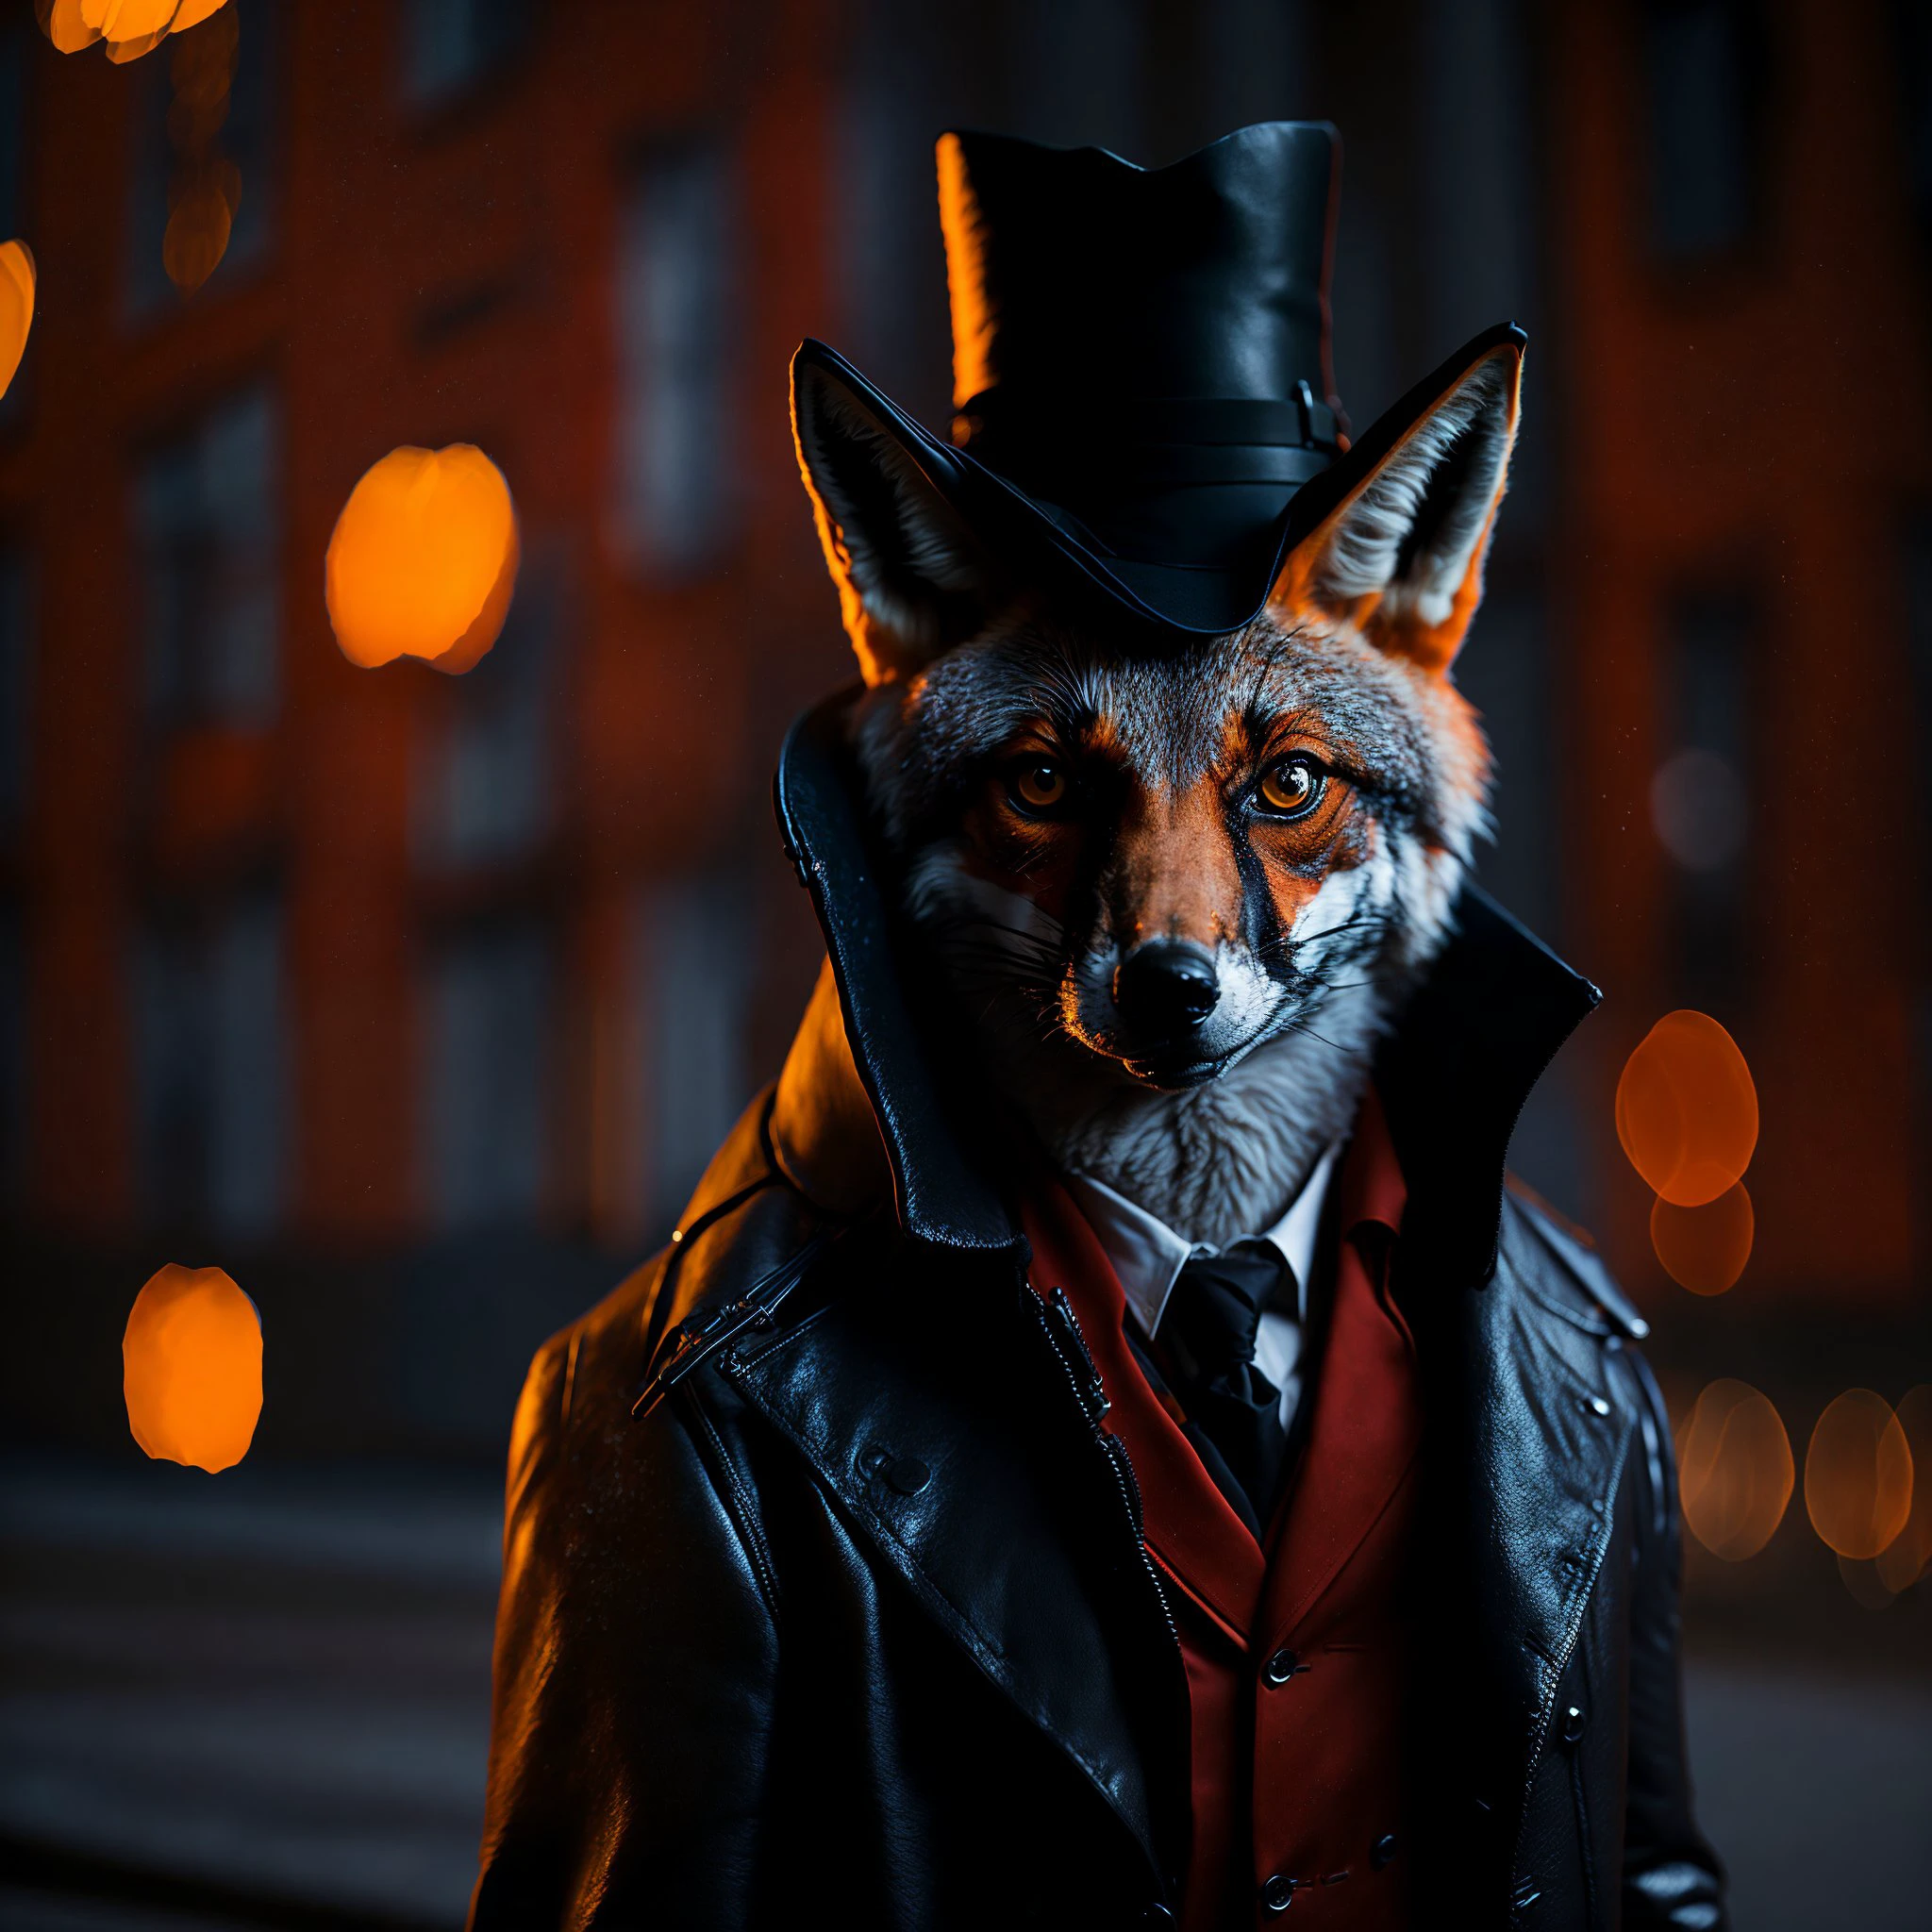 award winning portrait of a fox dressed as a secret agent, on the Red Square, bokeh, backlit